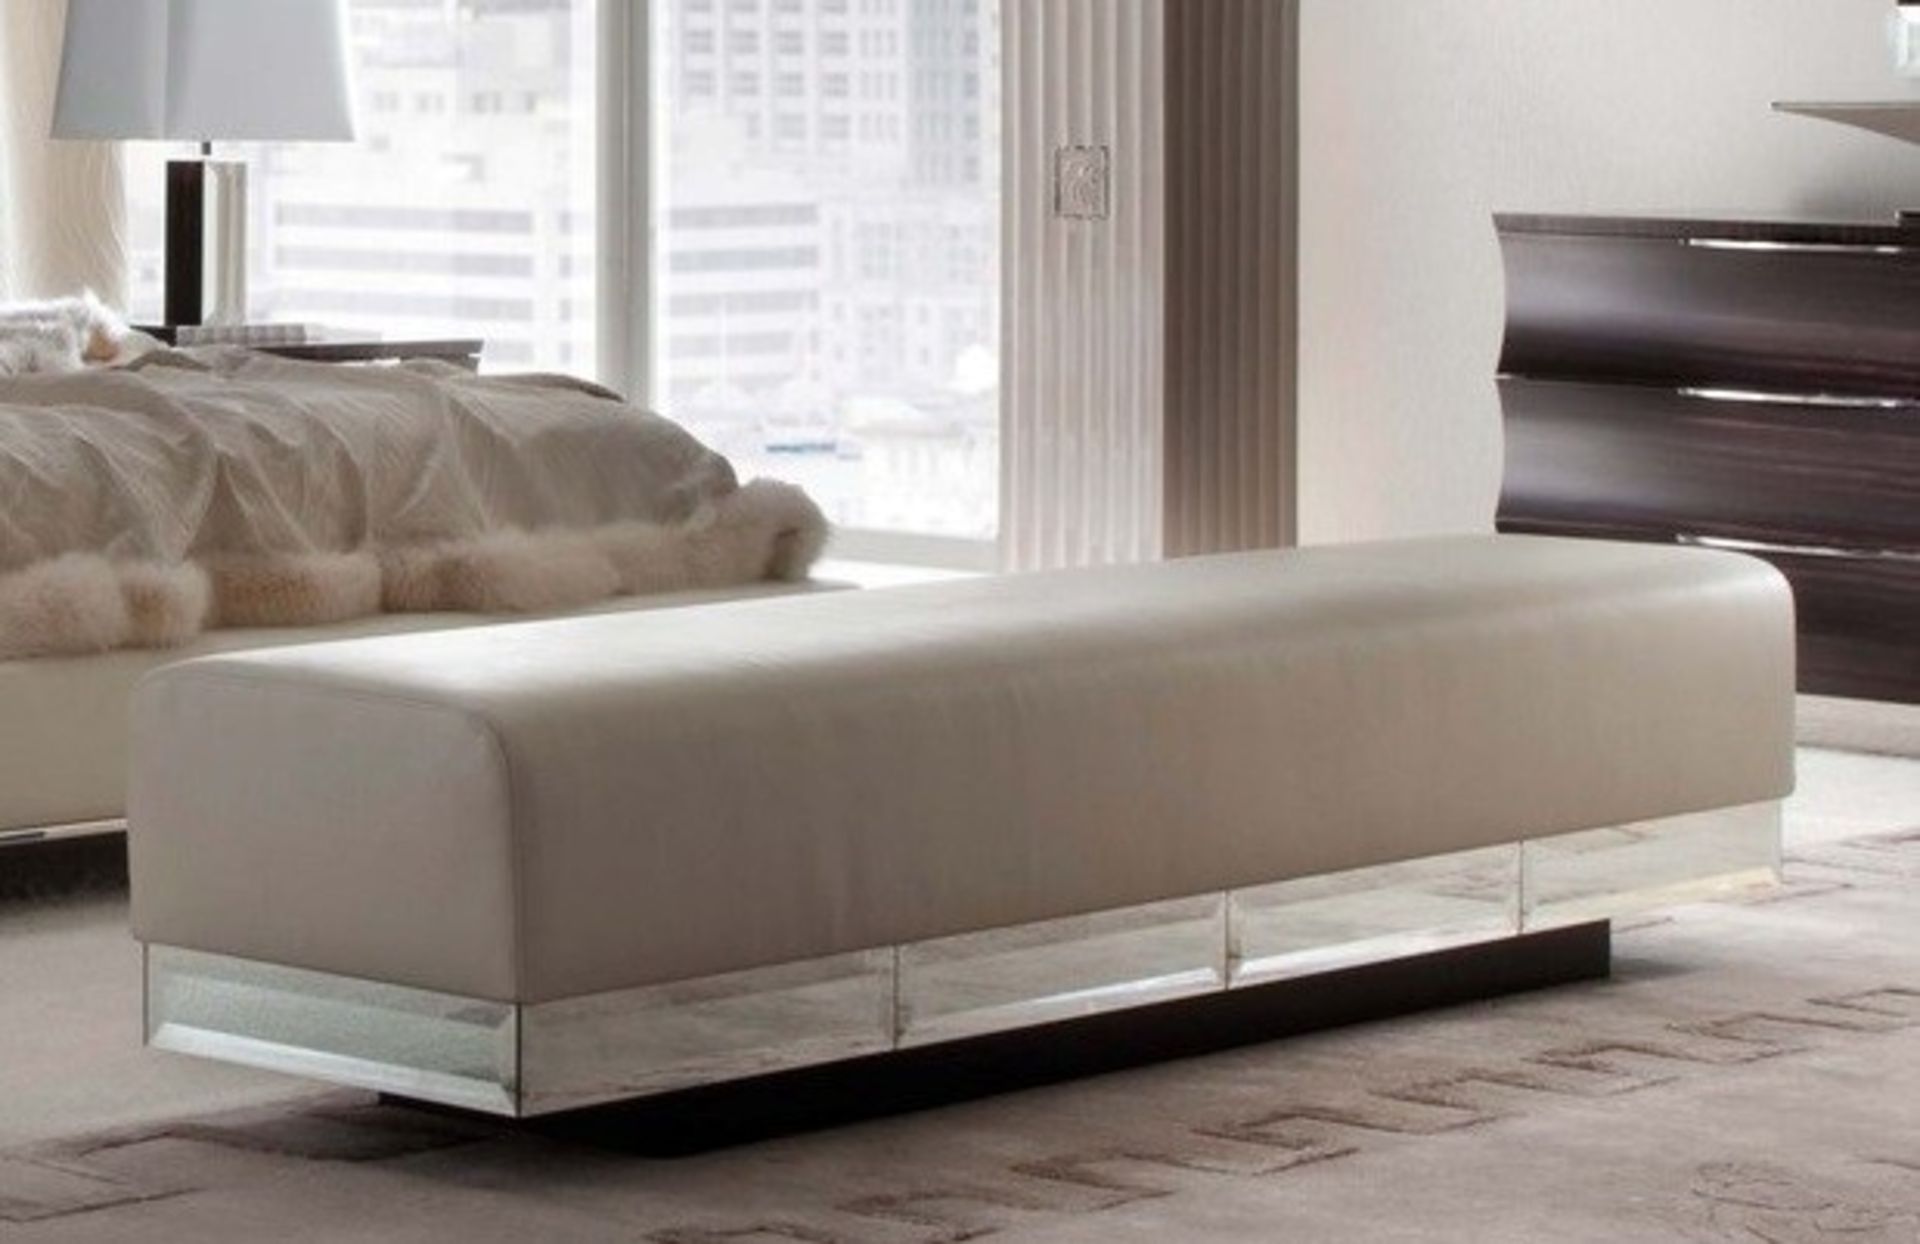 1 x GIORGIO Day Dream Bench - Features Lizard Printed First Grade Leather and Beveled, Mirroed